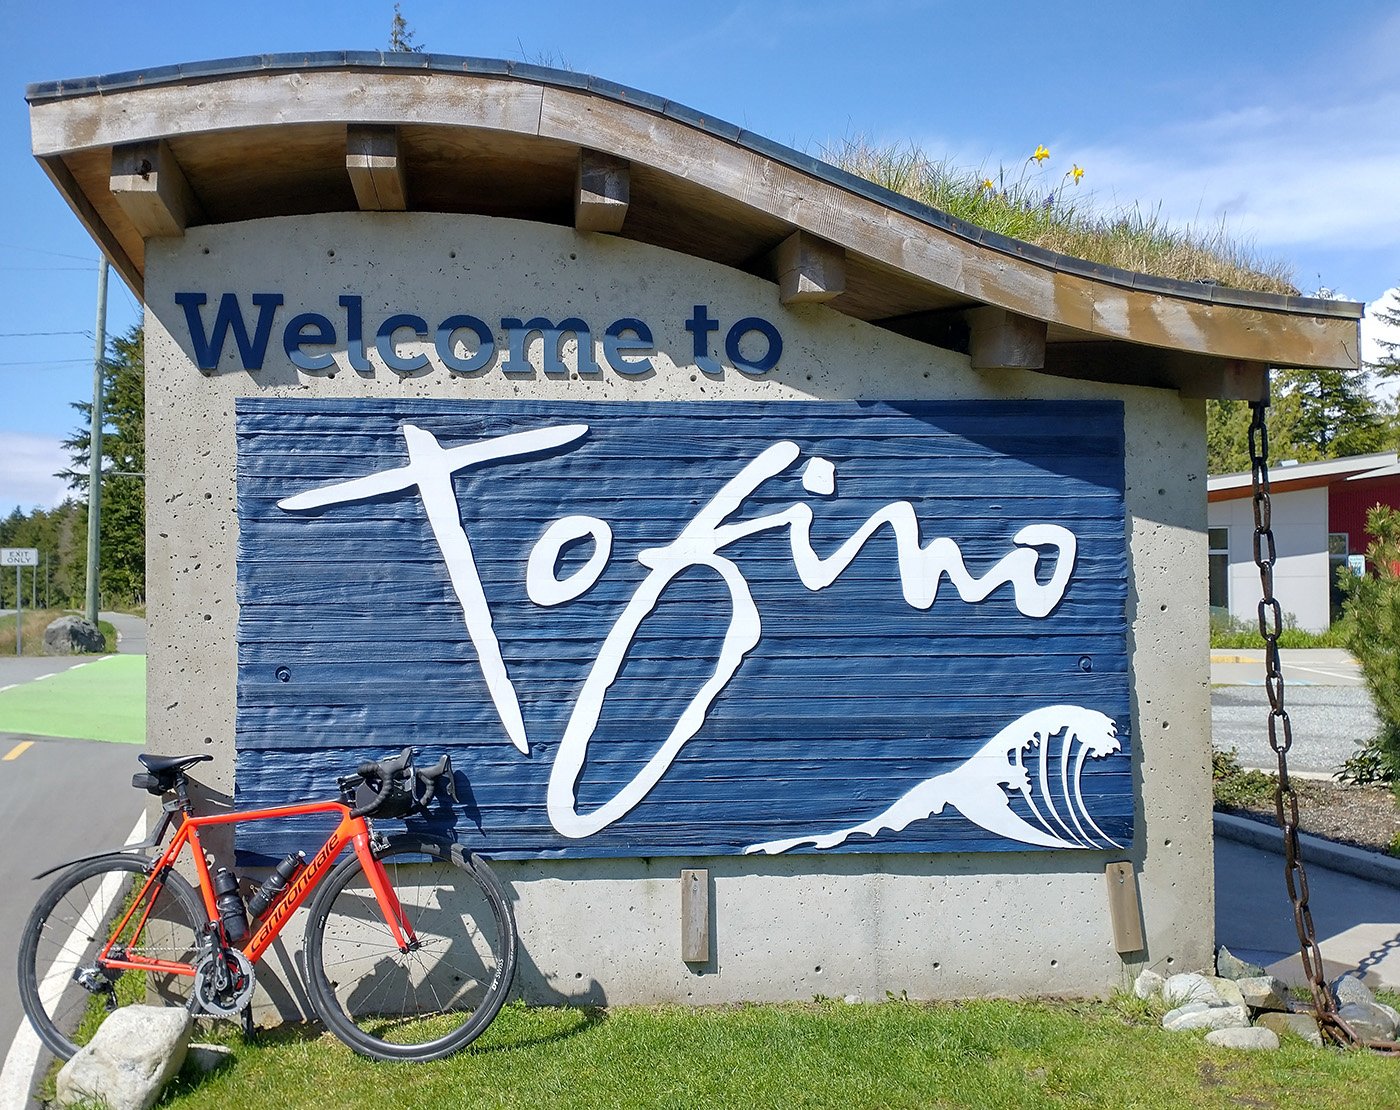  After crossing the mountains you finally reach Tofino, Vancouver Island’s prime destination for surfing and the biggest tourist trap around!  